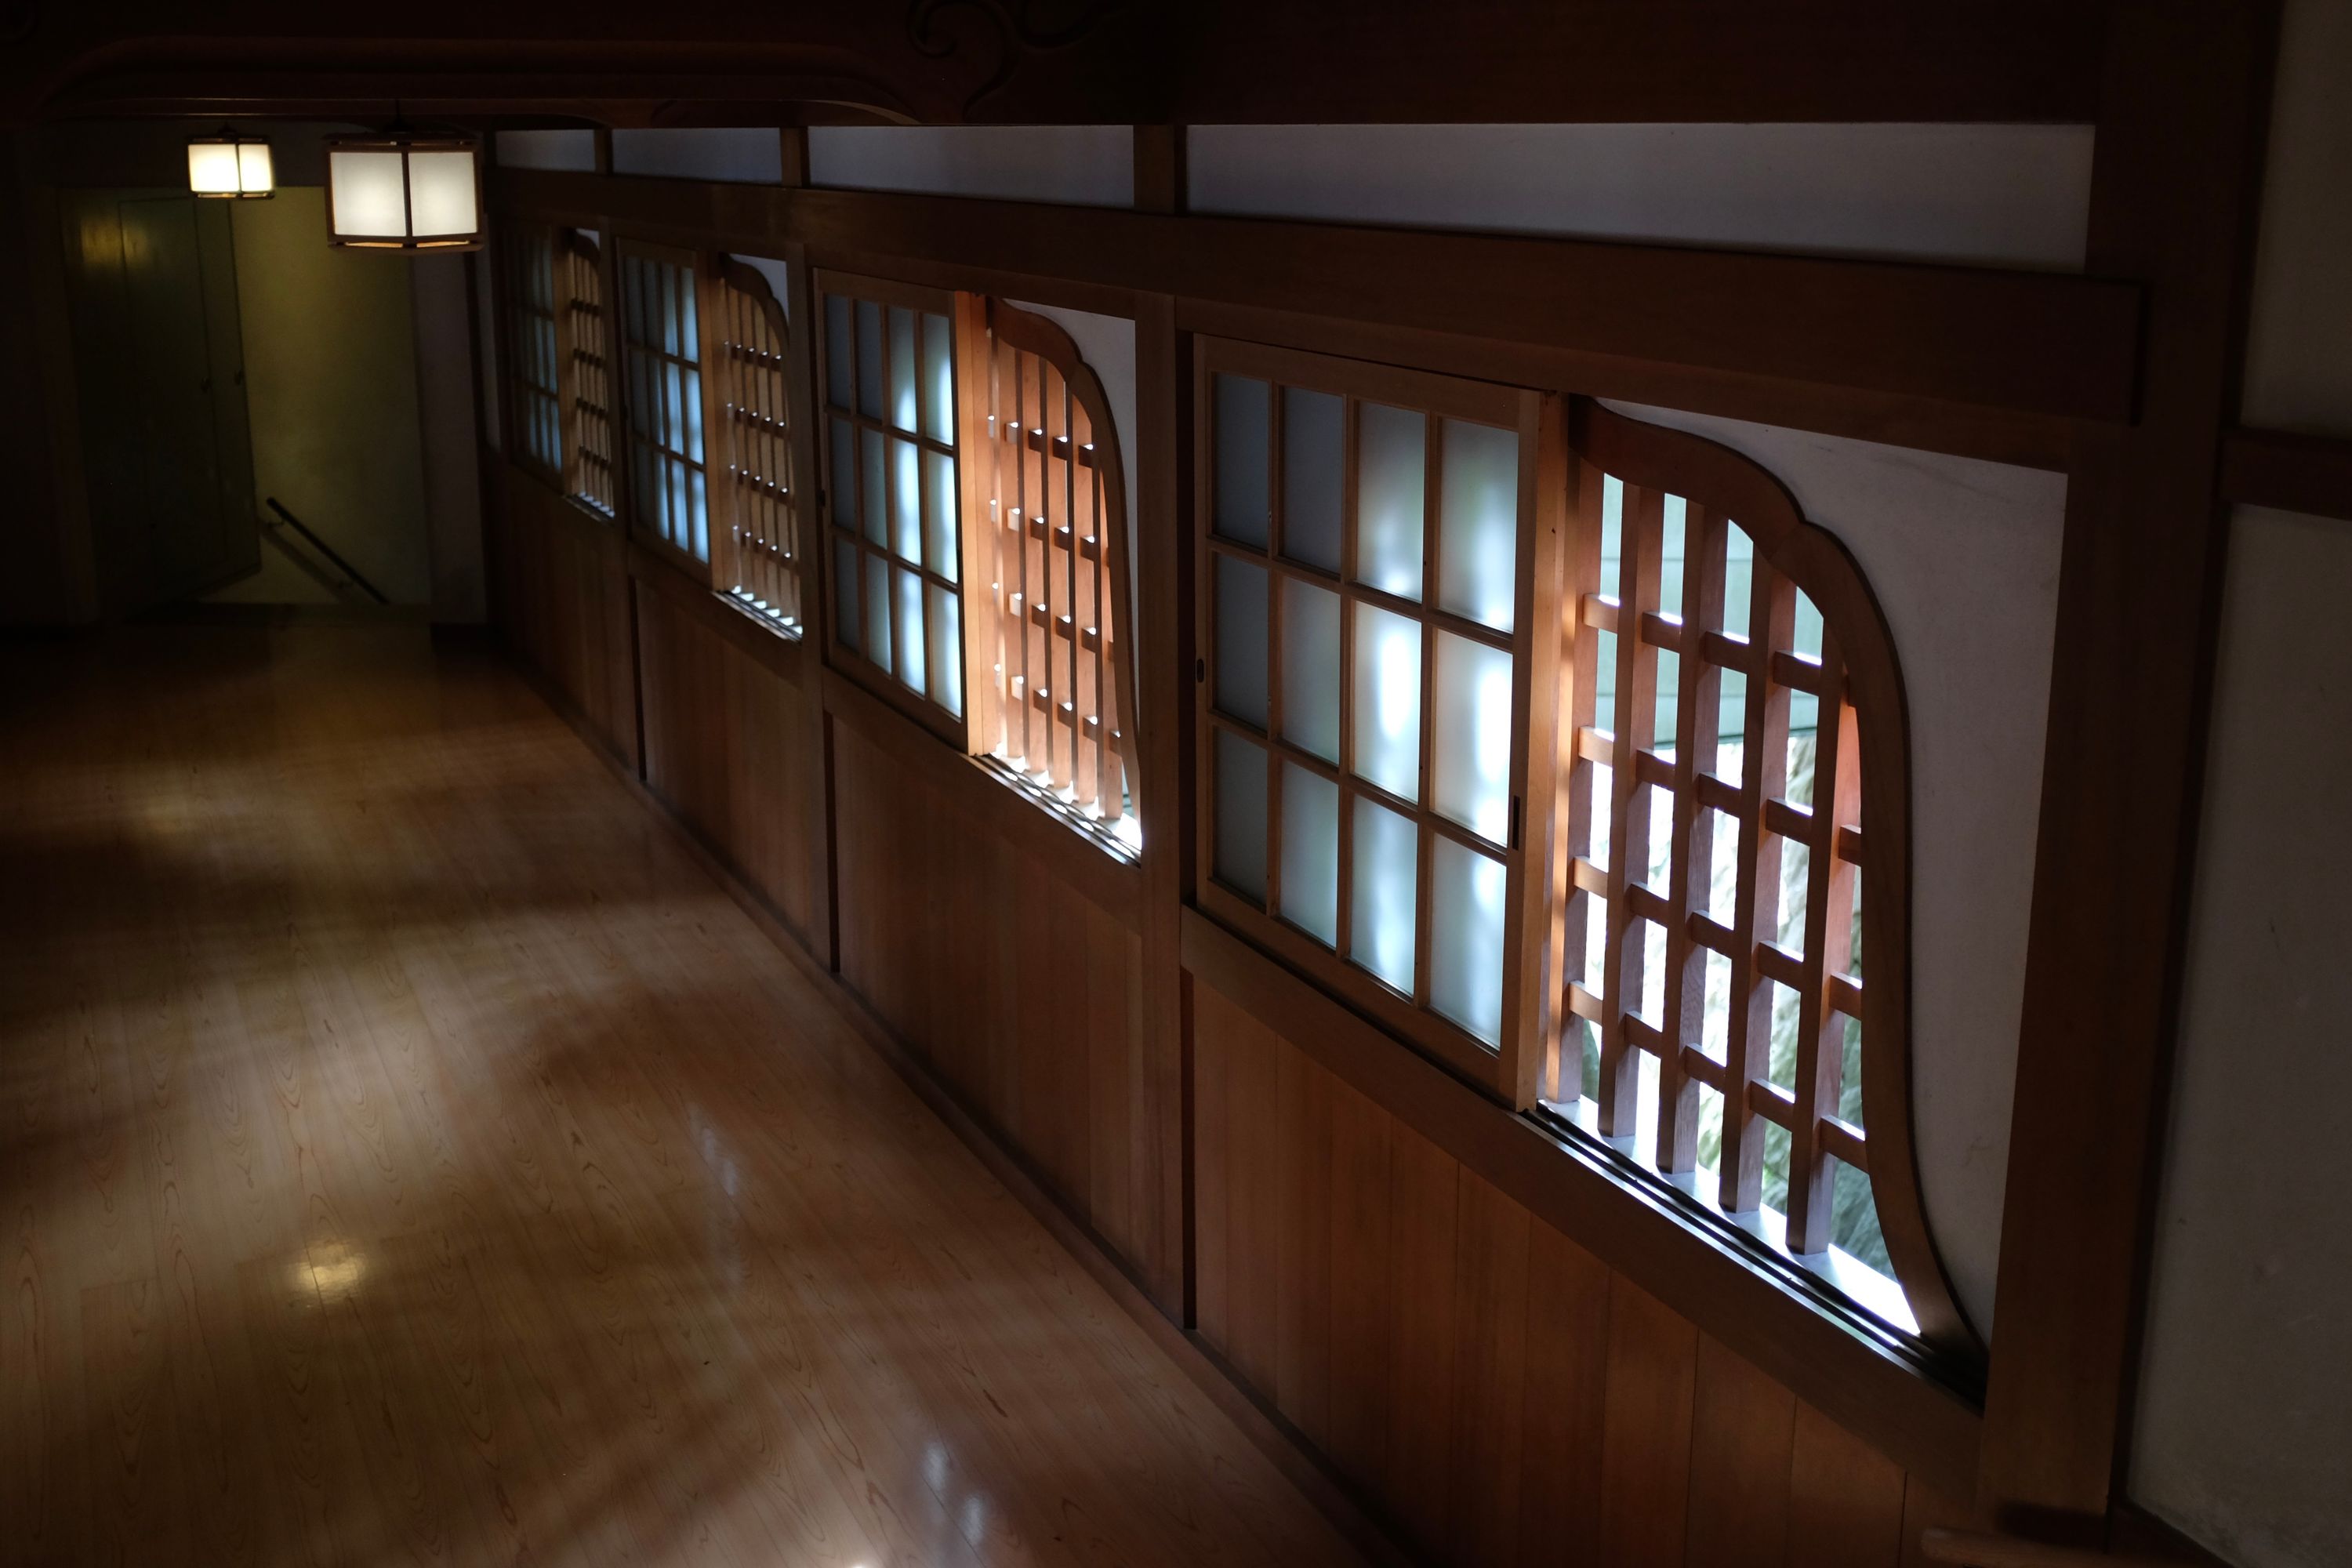 Carved wooden windows direct light on a polished wooden floor.